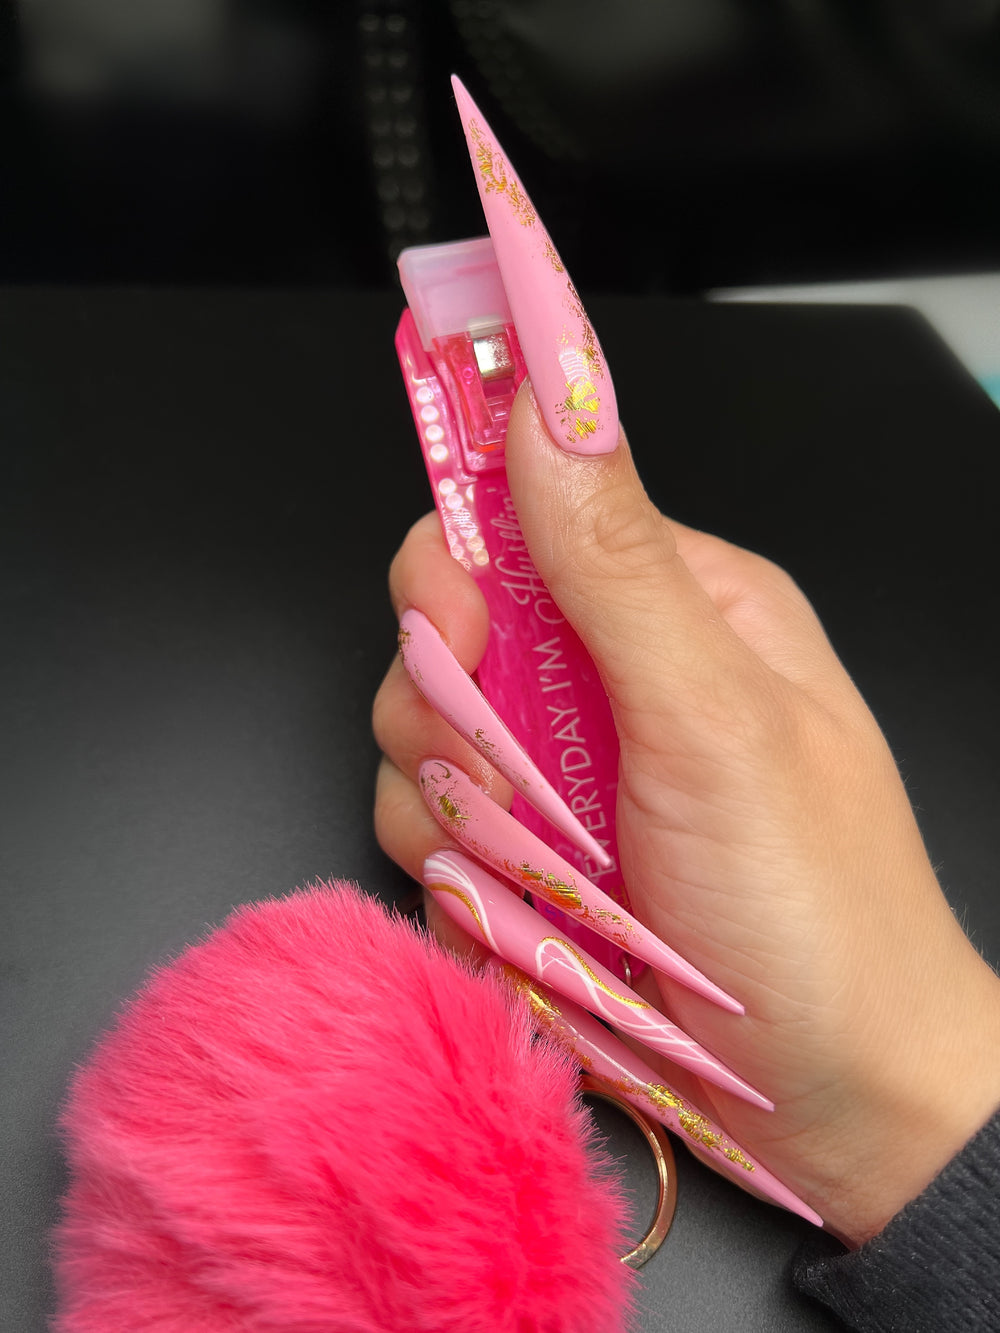 Contactless Credit Cards Puller Card Grabber for Long Nails with